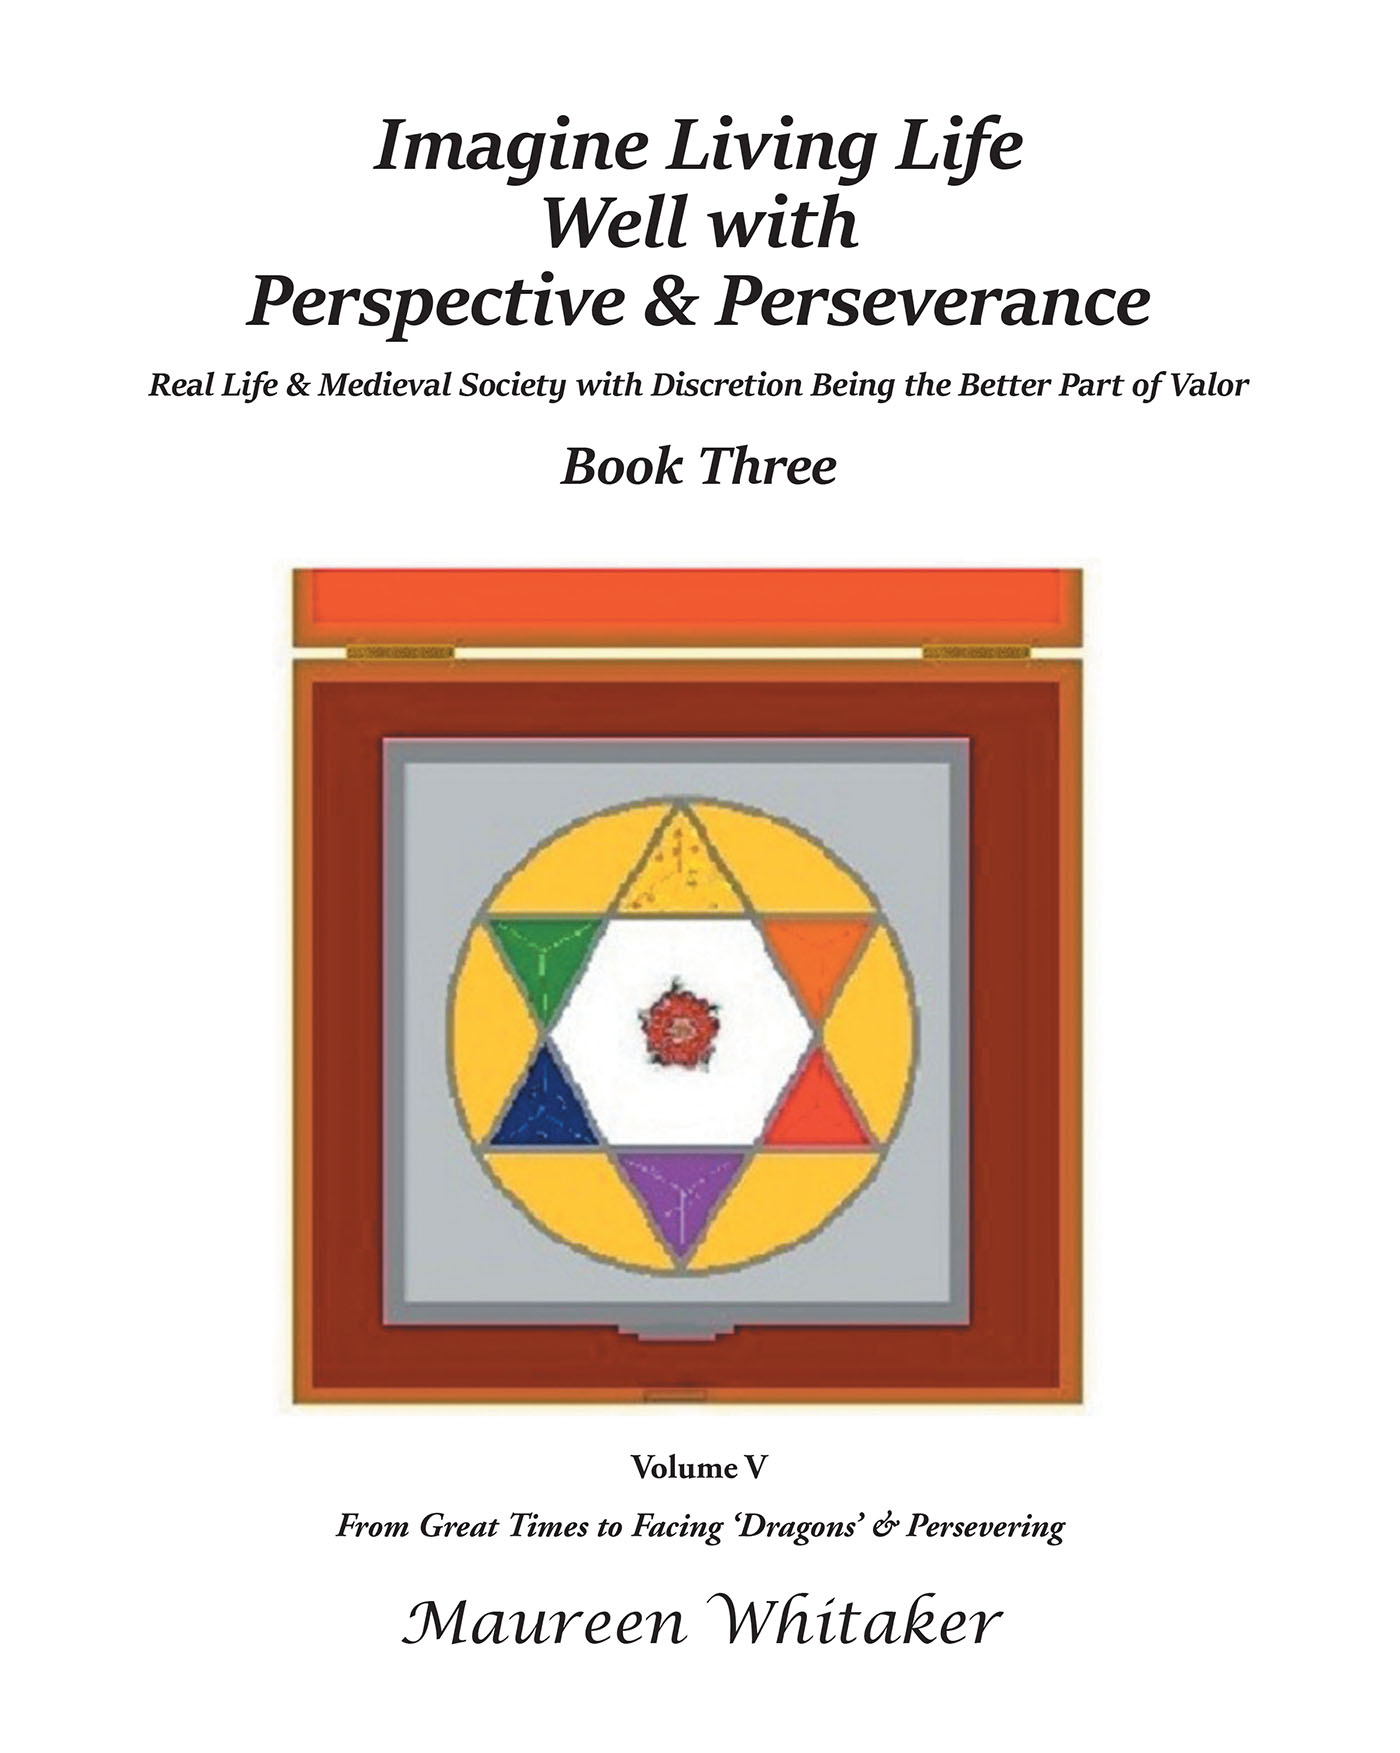 Maureen Whitaker’s New Book, "Imagine Living Life Well with Perspective & Perseverance: Book 4," Follows Four Friends & Their Continued Travels with the Medieval Society